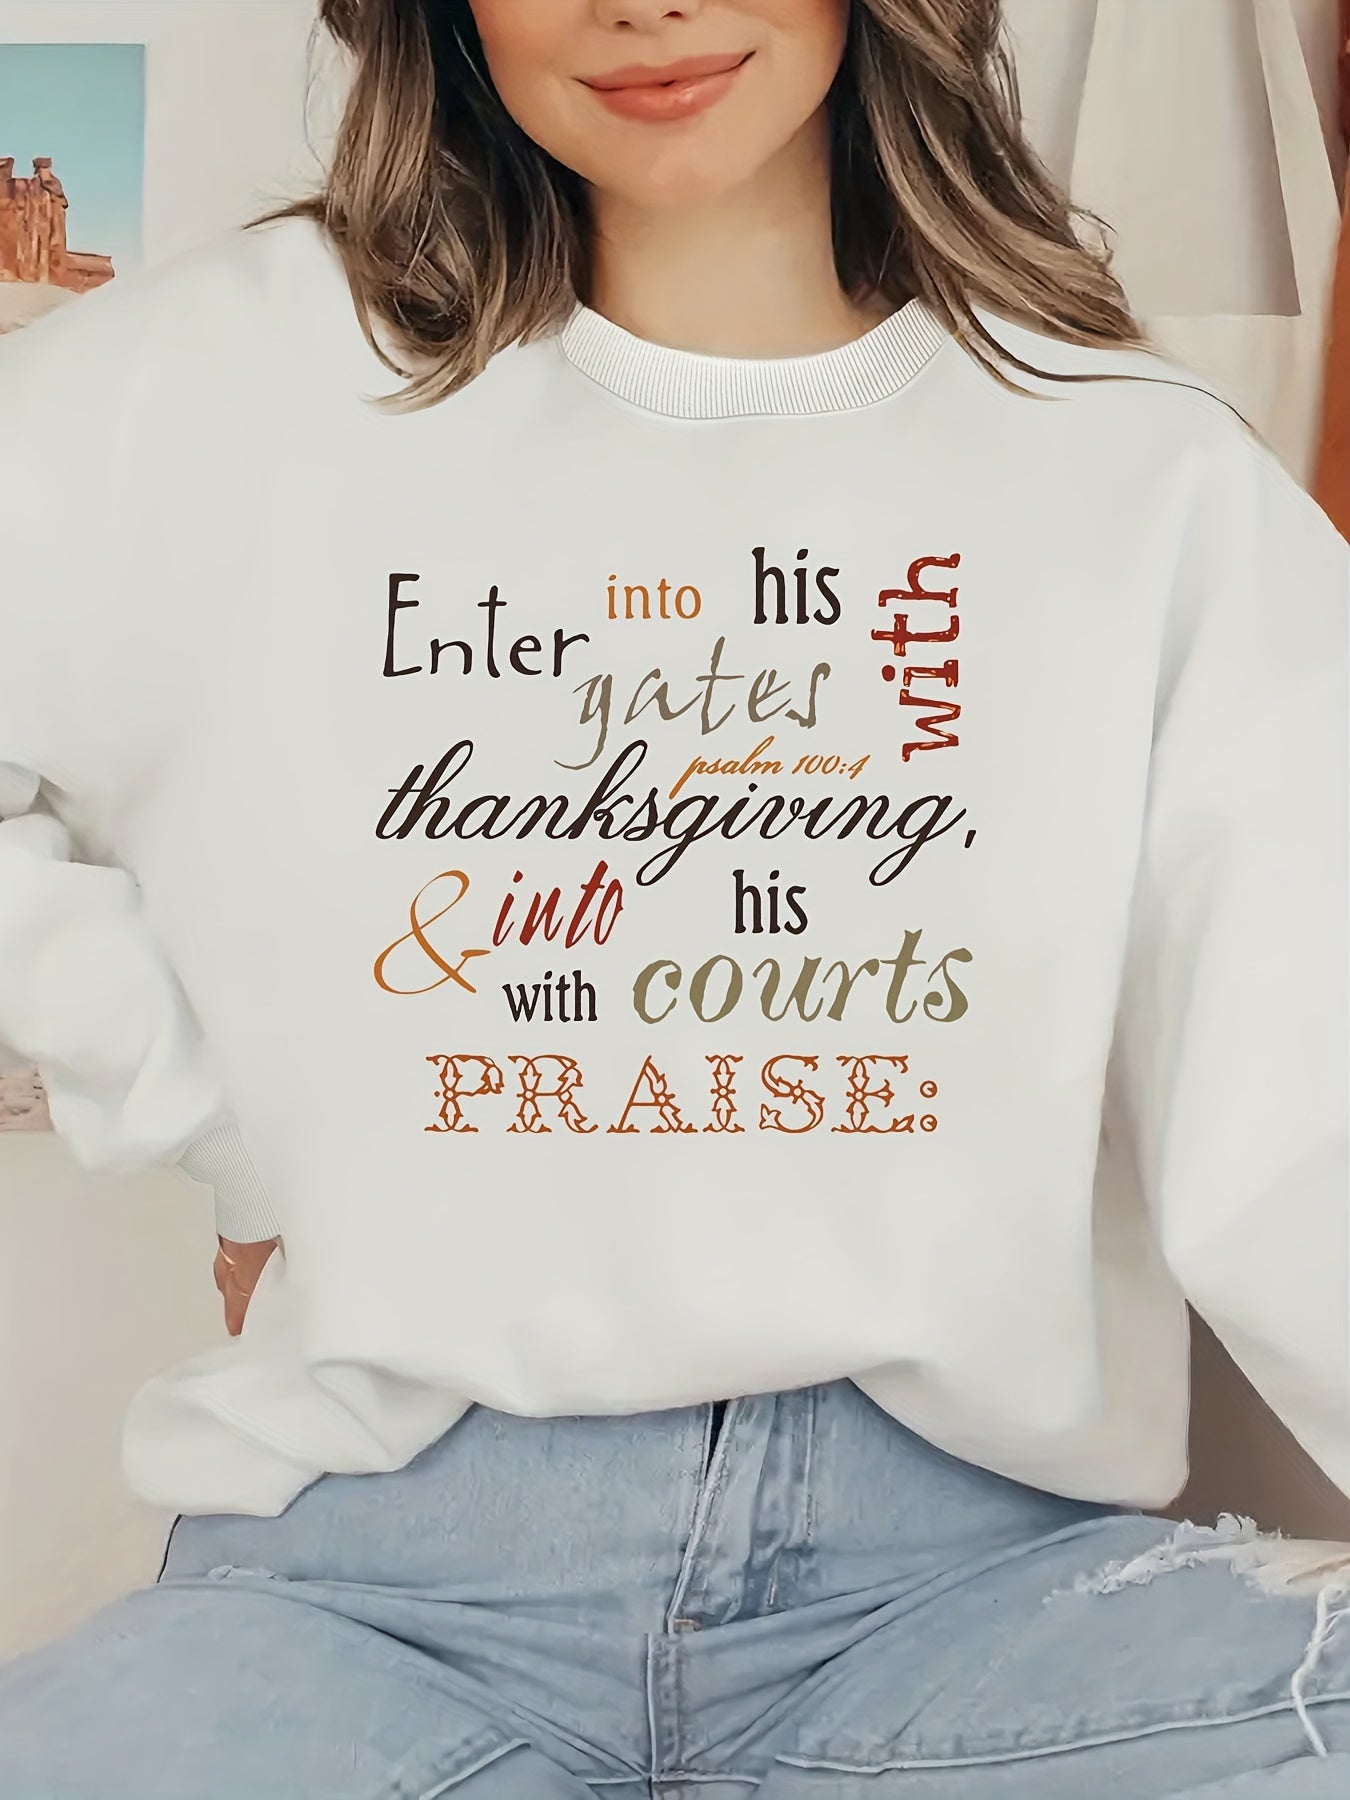 Enter Into His Gates With Thanksgiving & Into His Courts With Praise Plus Size Women's Christian Pullover Sweatshirt claimedbygoddesigns